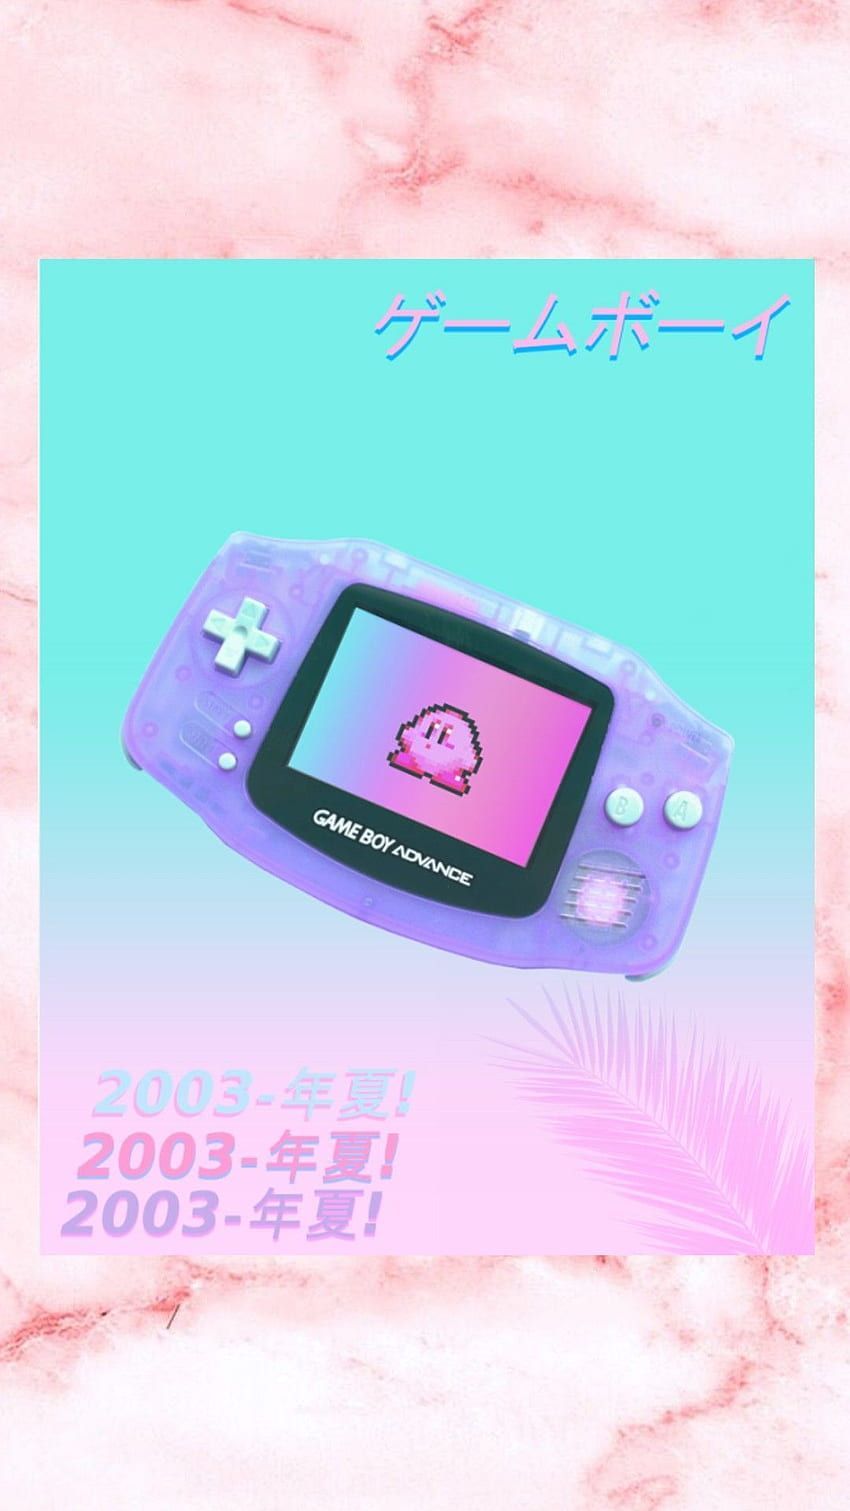 Game boy advance with a pink and blue background - Nintendo